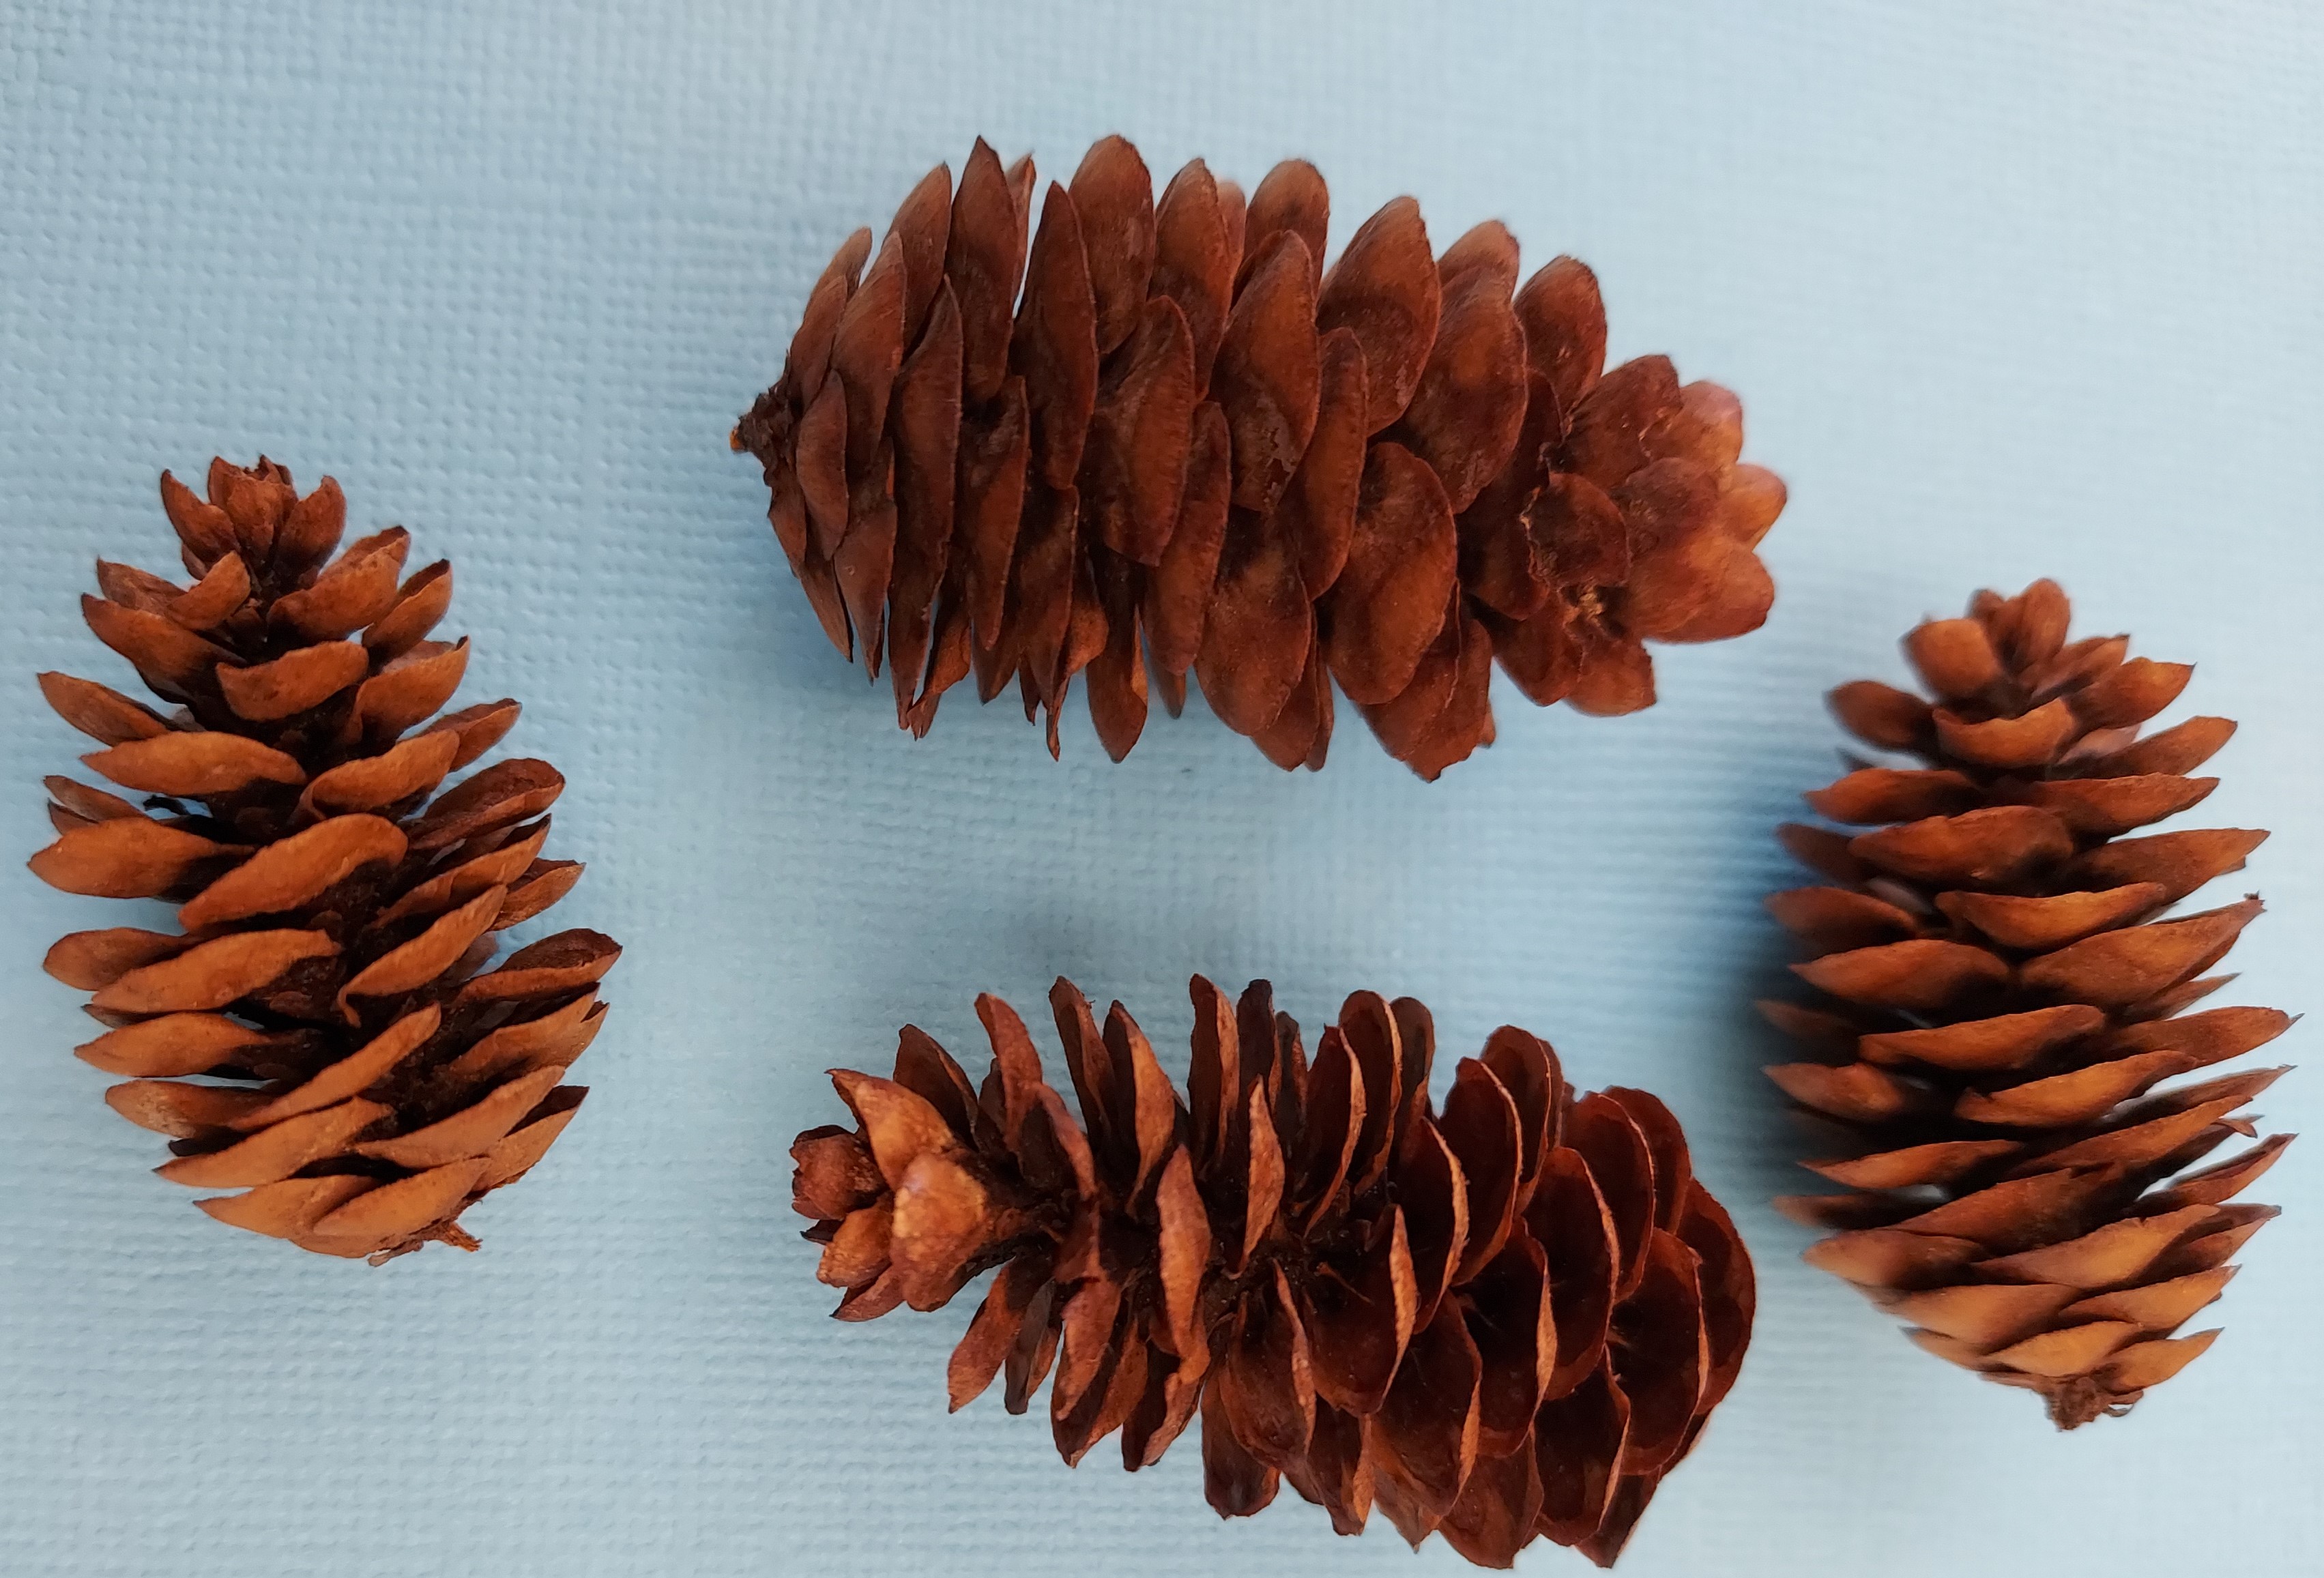 This photo shows four brown Engelmann spruce cones arranged on a white paper towel